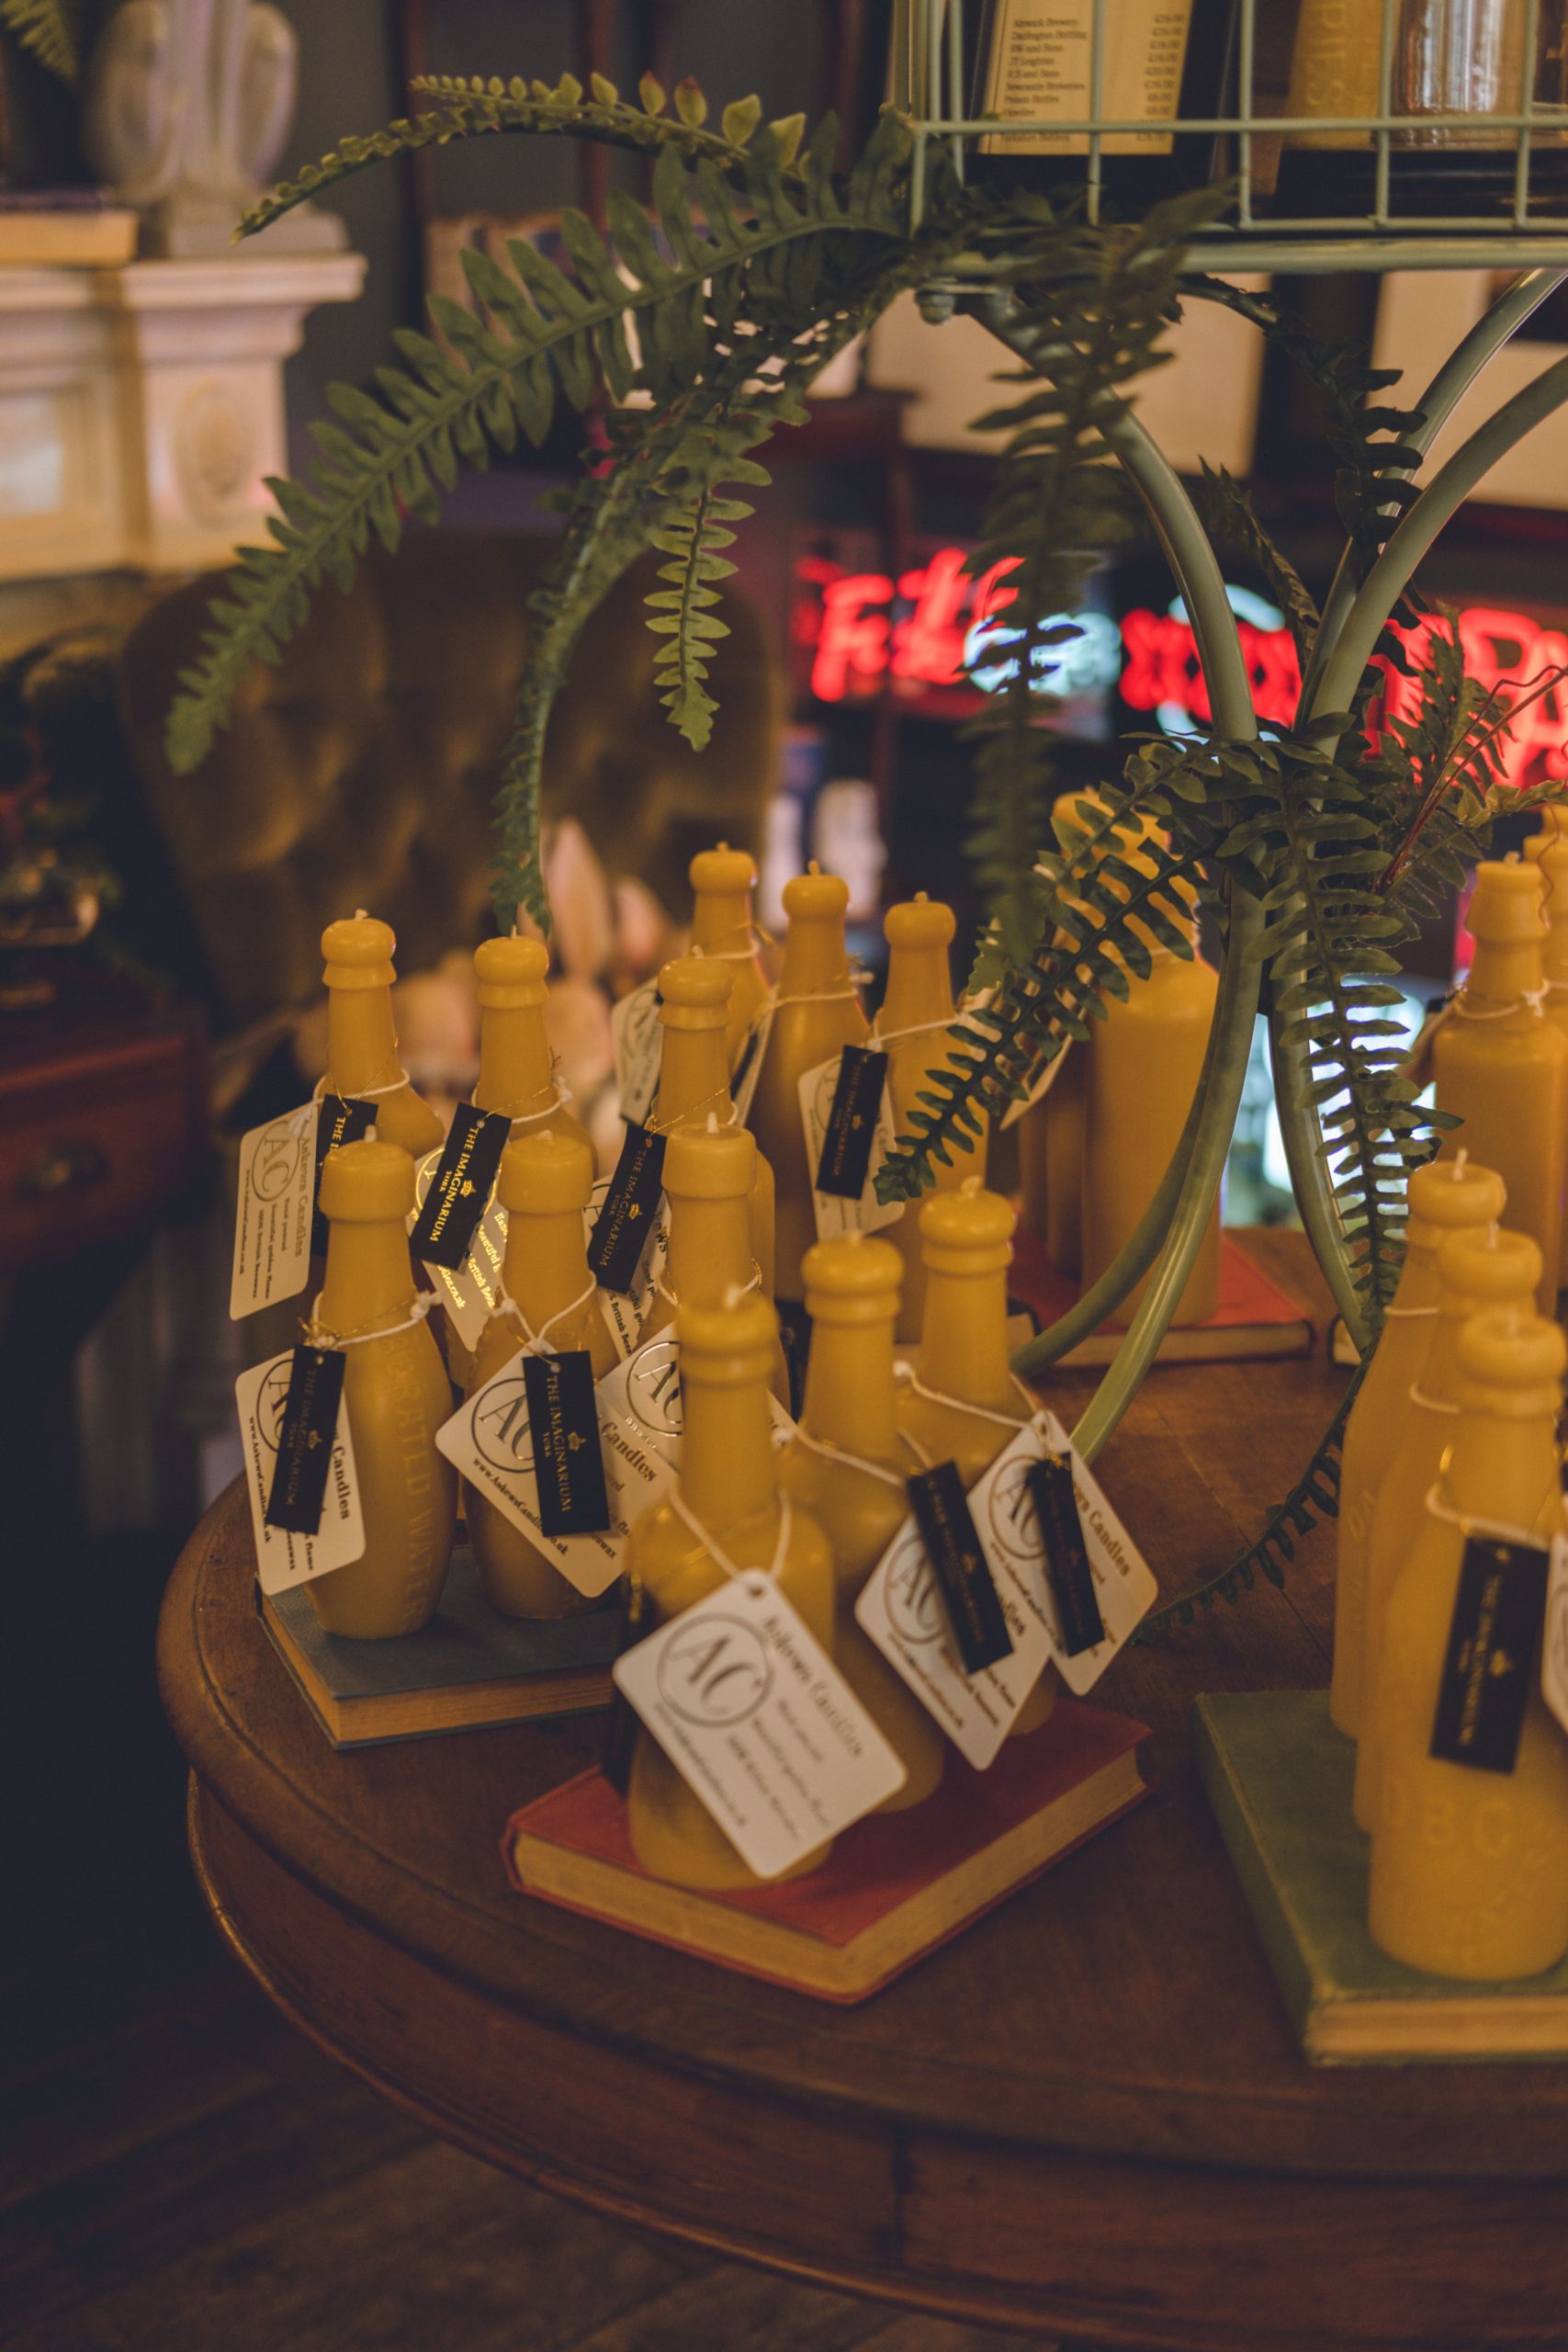 Bottle shaped candles at the imaginarium